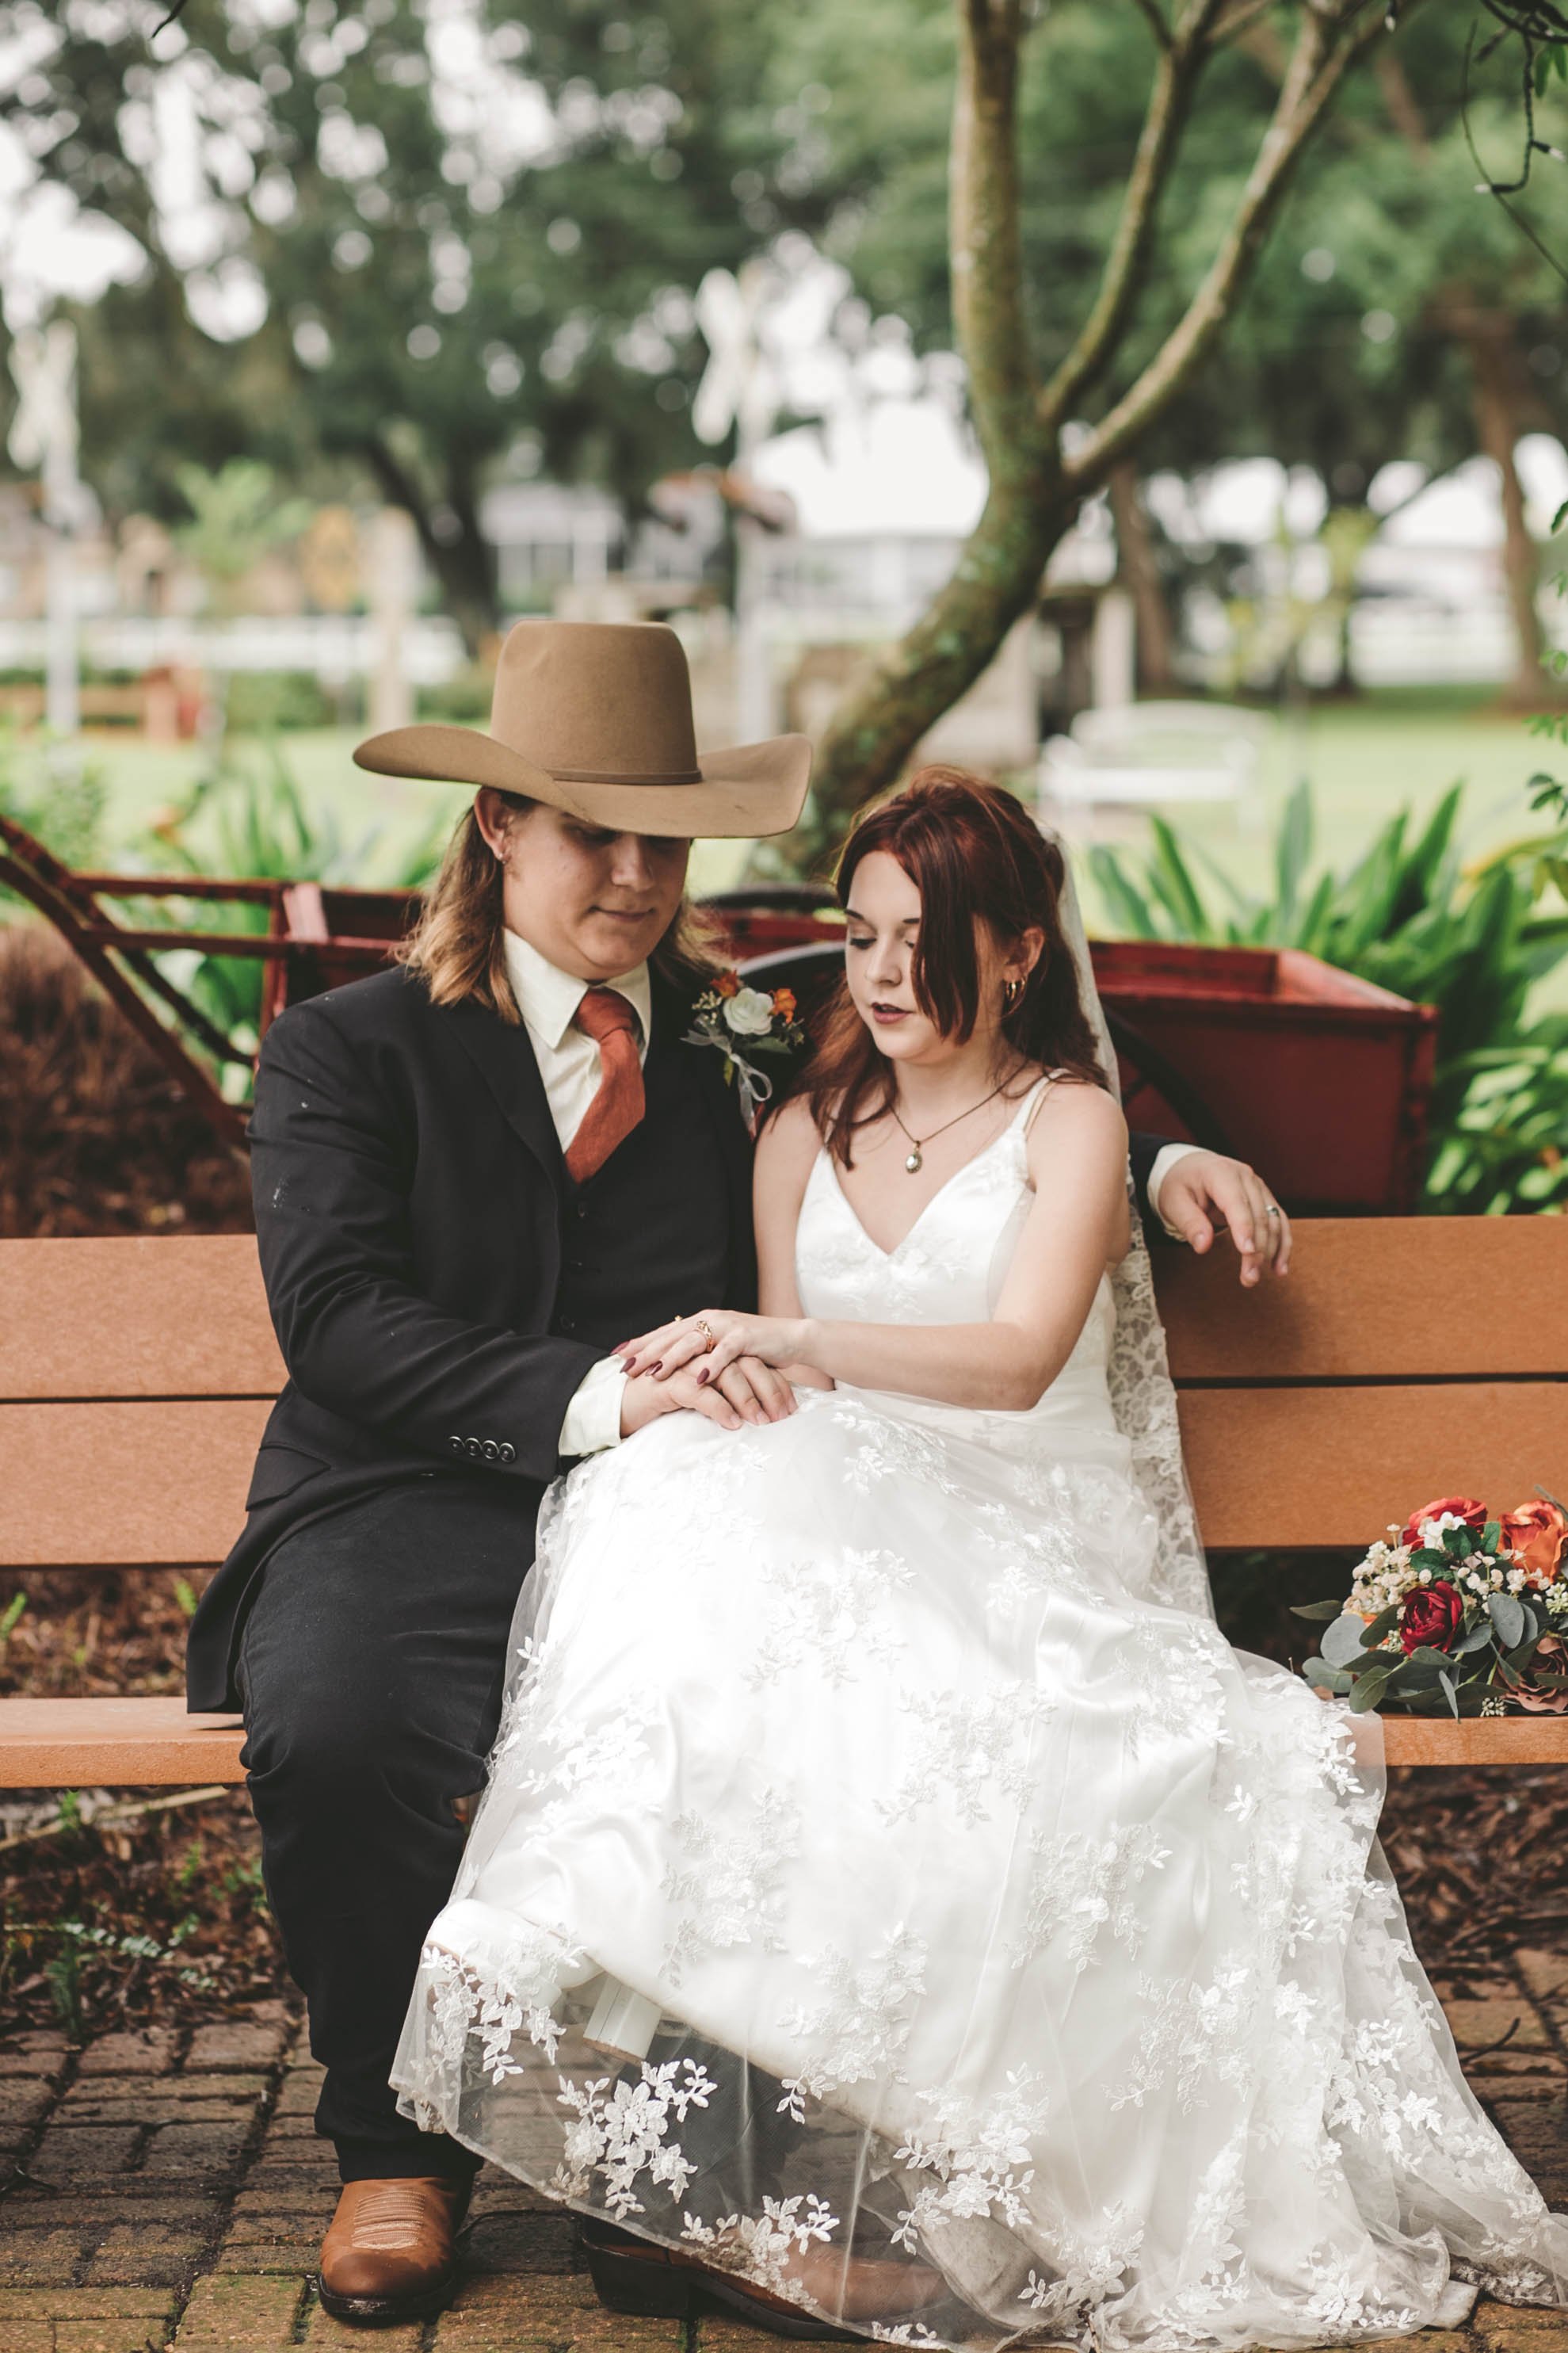 Ever After Flower Farms in Seffner, FL Wedding Photographer